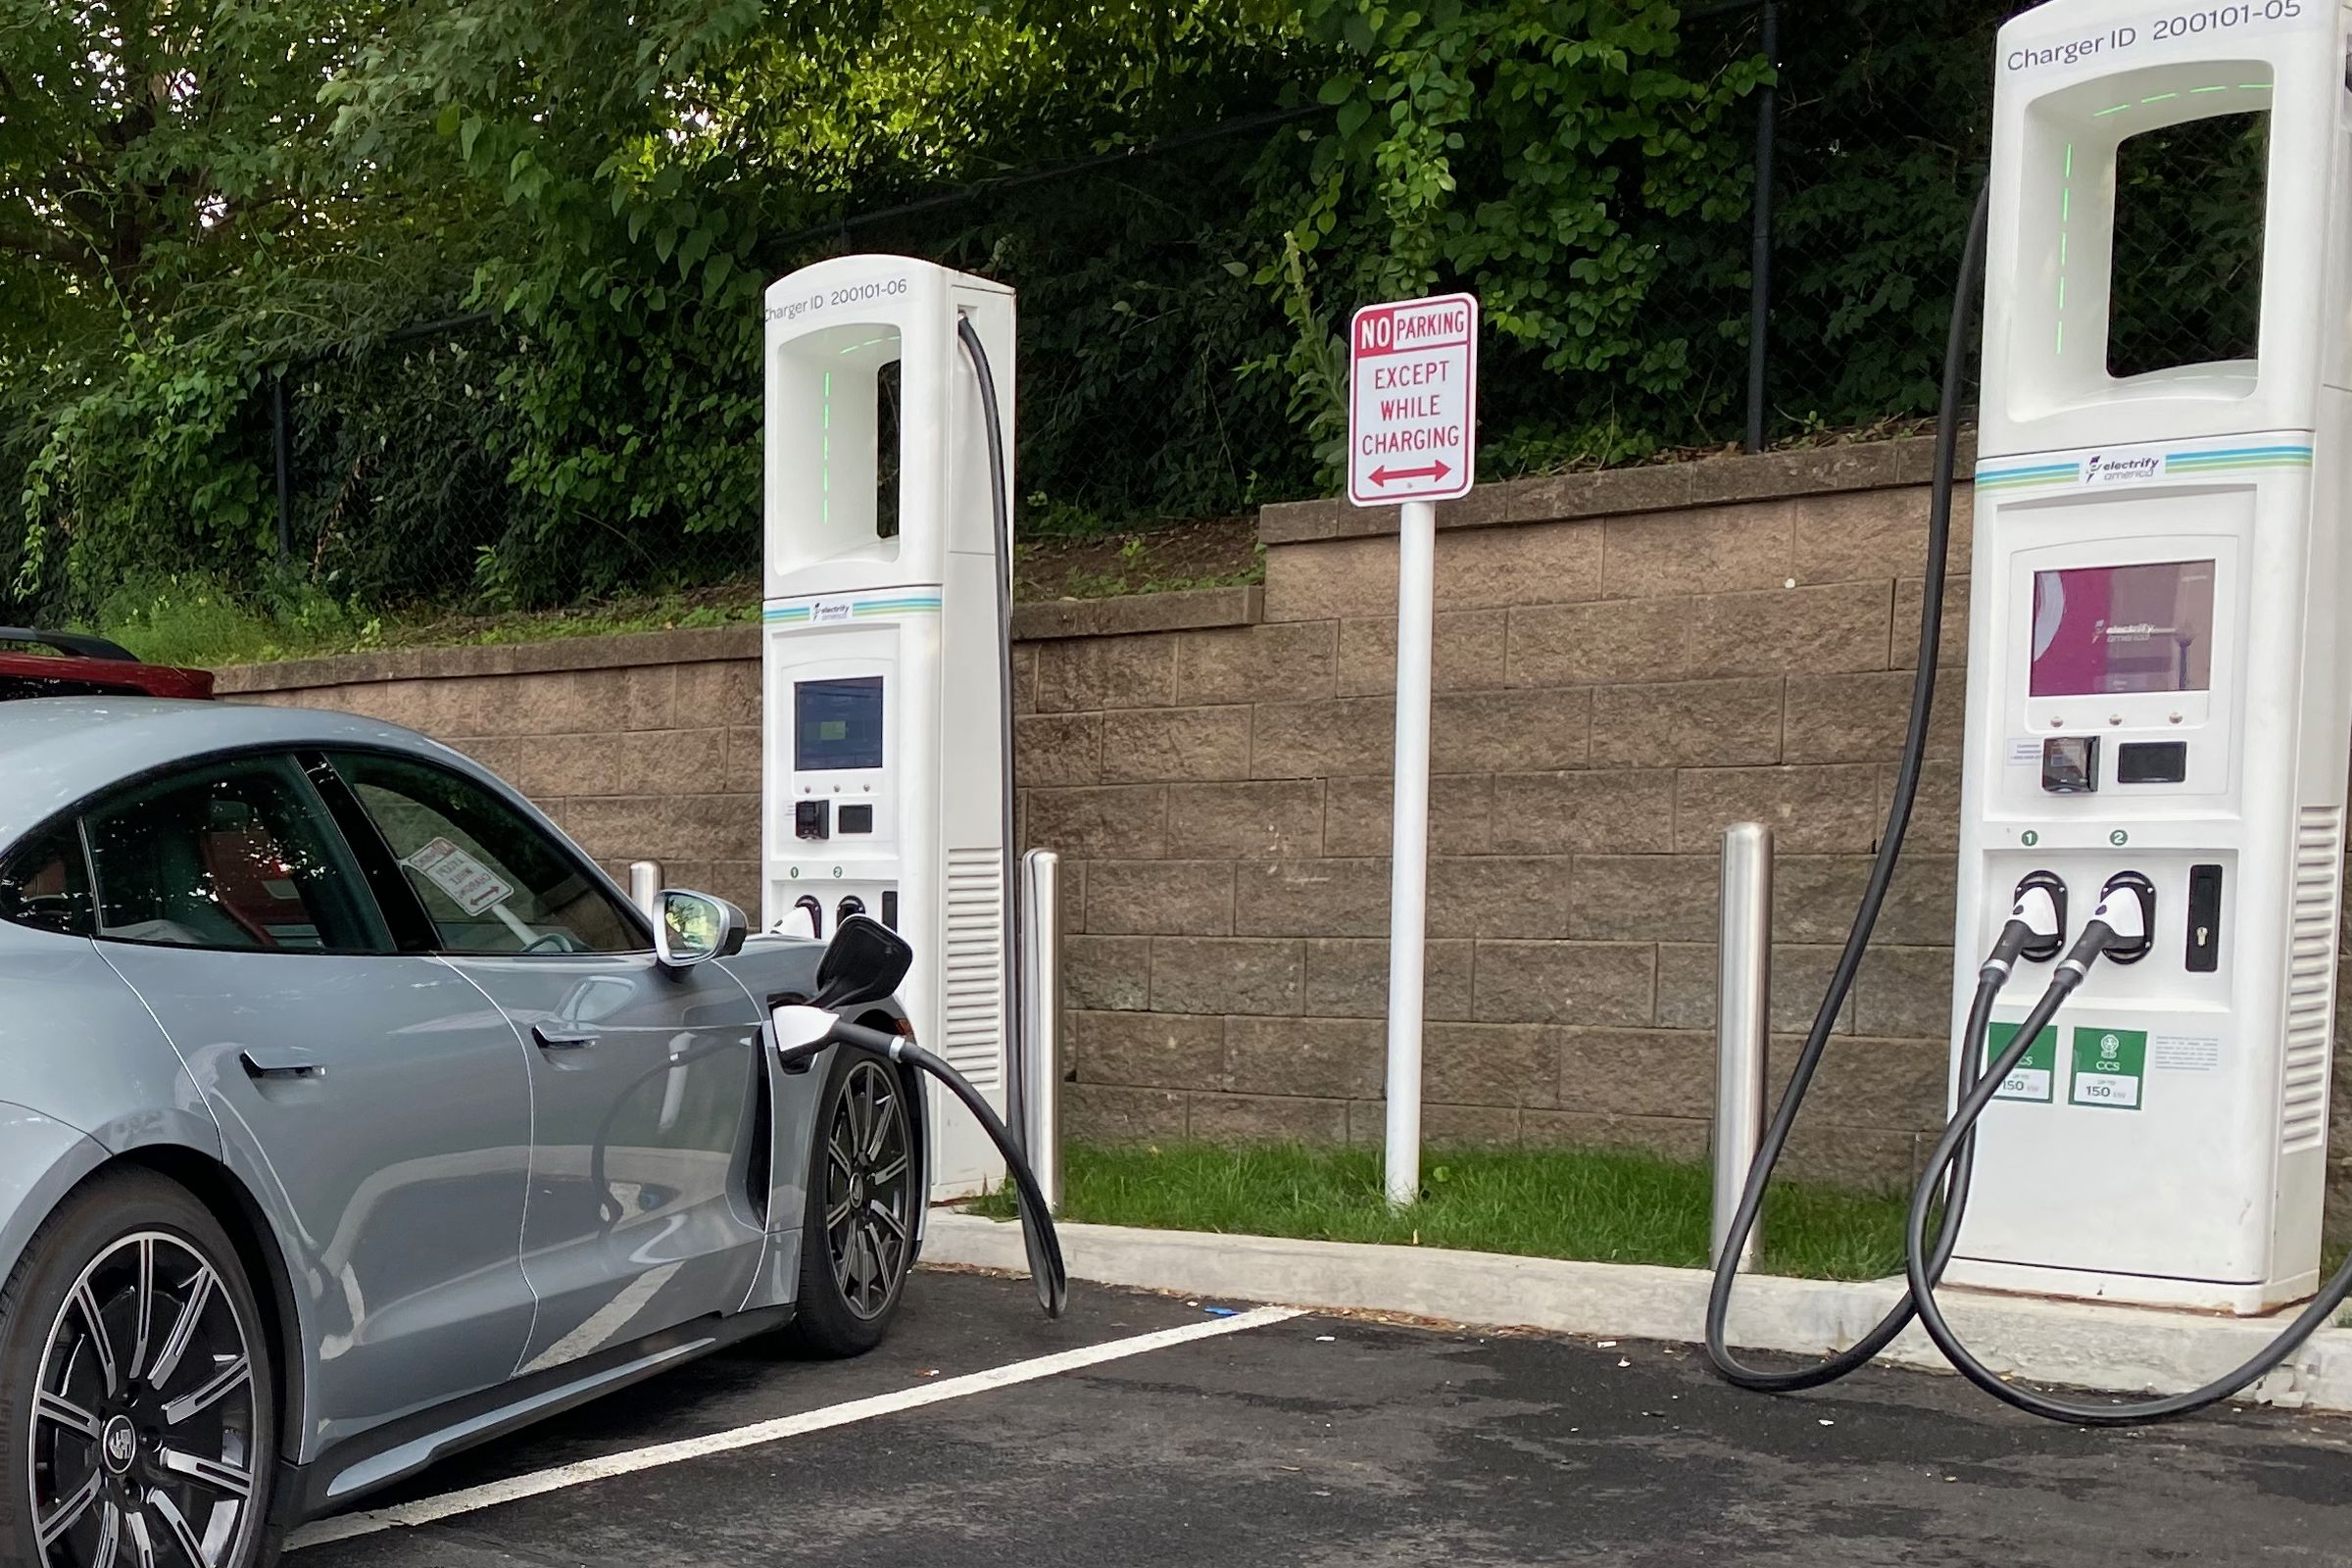 two electrify America stations with two plugs each are divided in stalls with a “no parking except while charging” sign in the middle. A silver Porsche taycan is plugged into one of the chargers and is parked at an angle that takes up parts of two spaces.